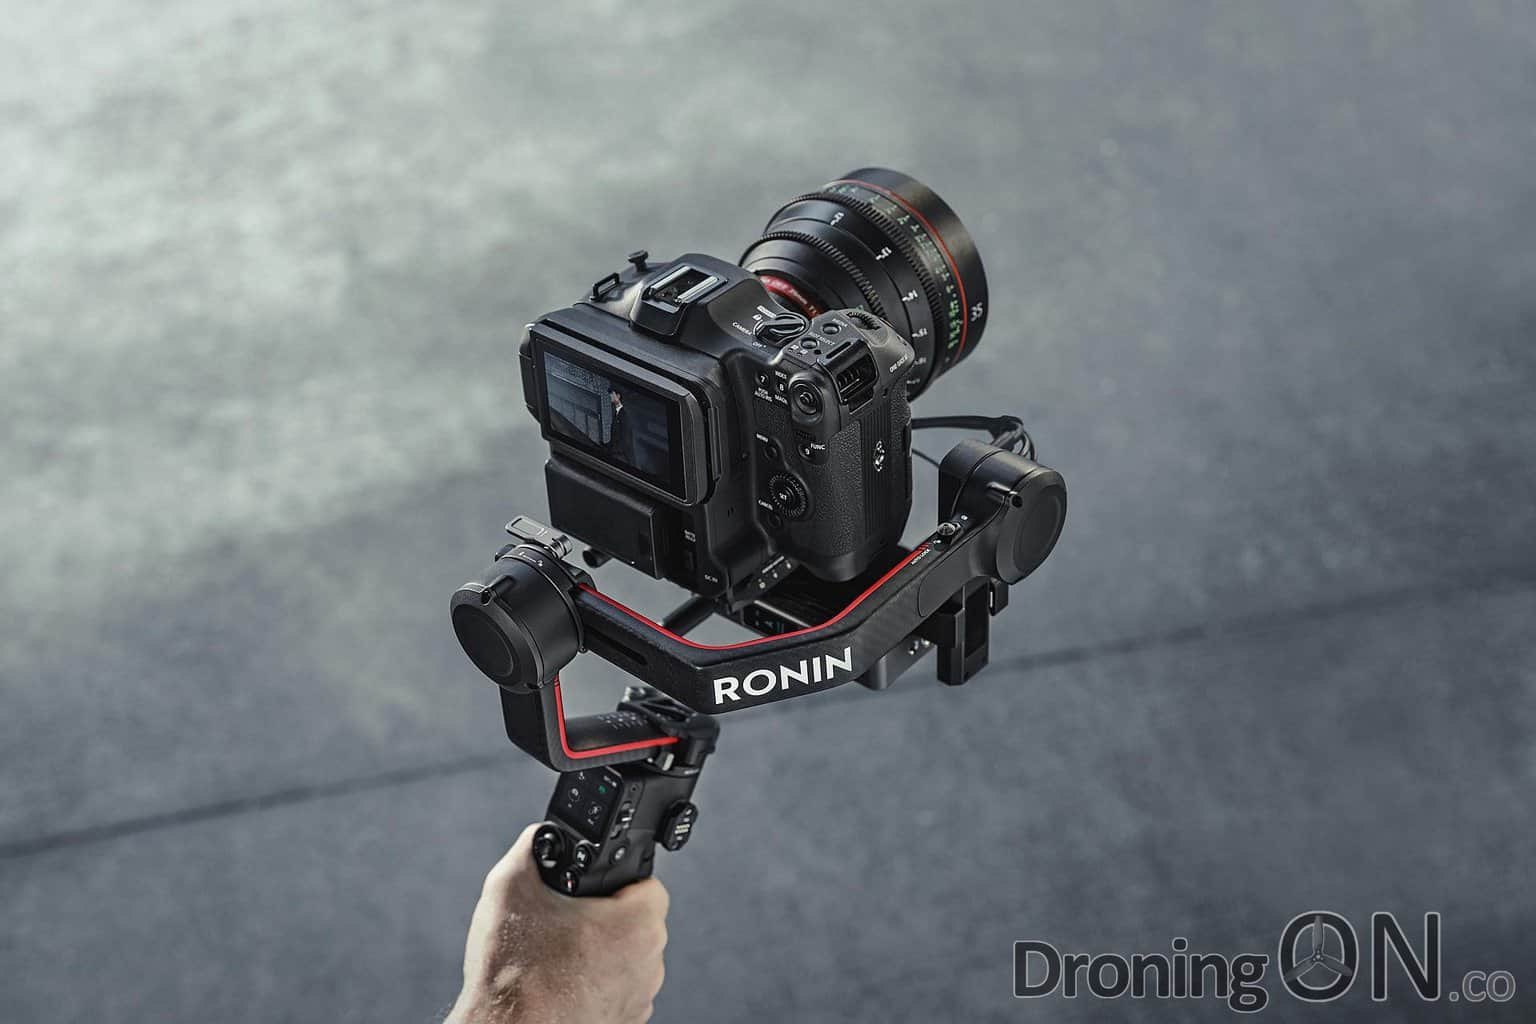 New DJI RS 3 Pro launched - Is it worth upgrading from DJI RS 2? - DroningON